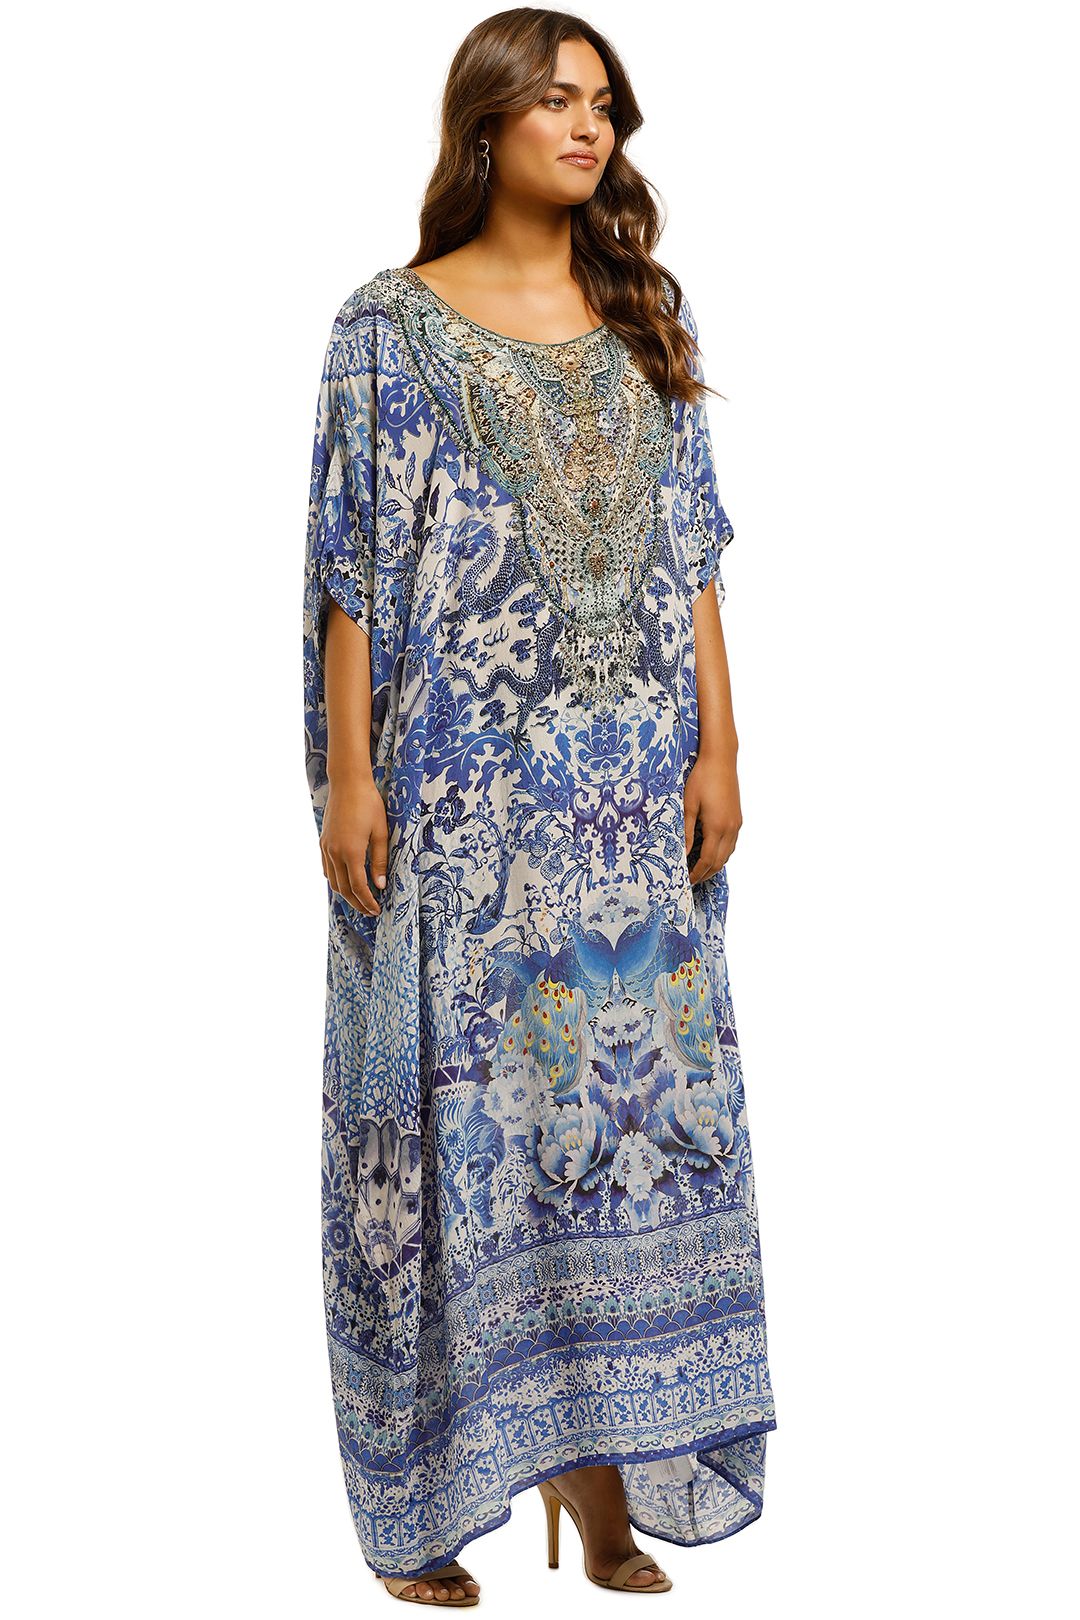 Guardian of Secrets Kaftan by Camilla for Hire